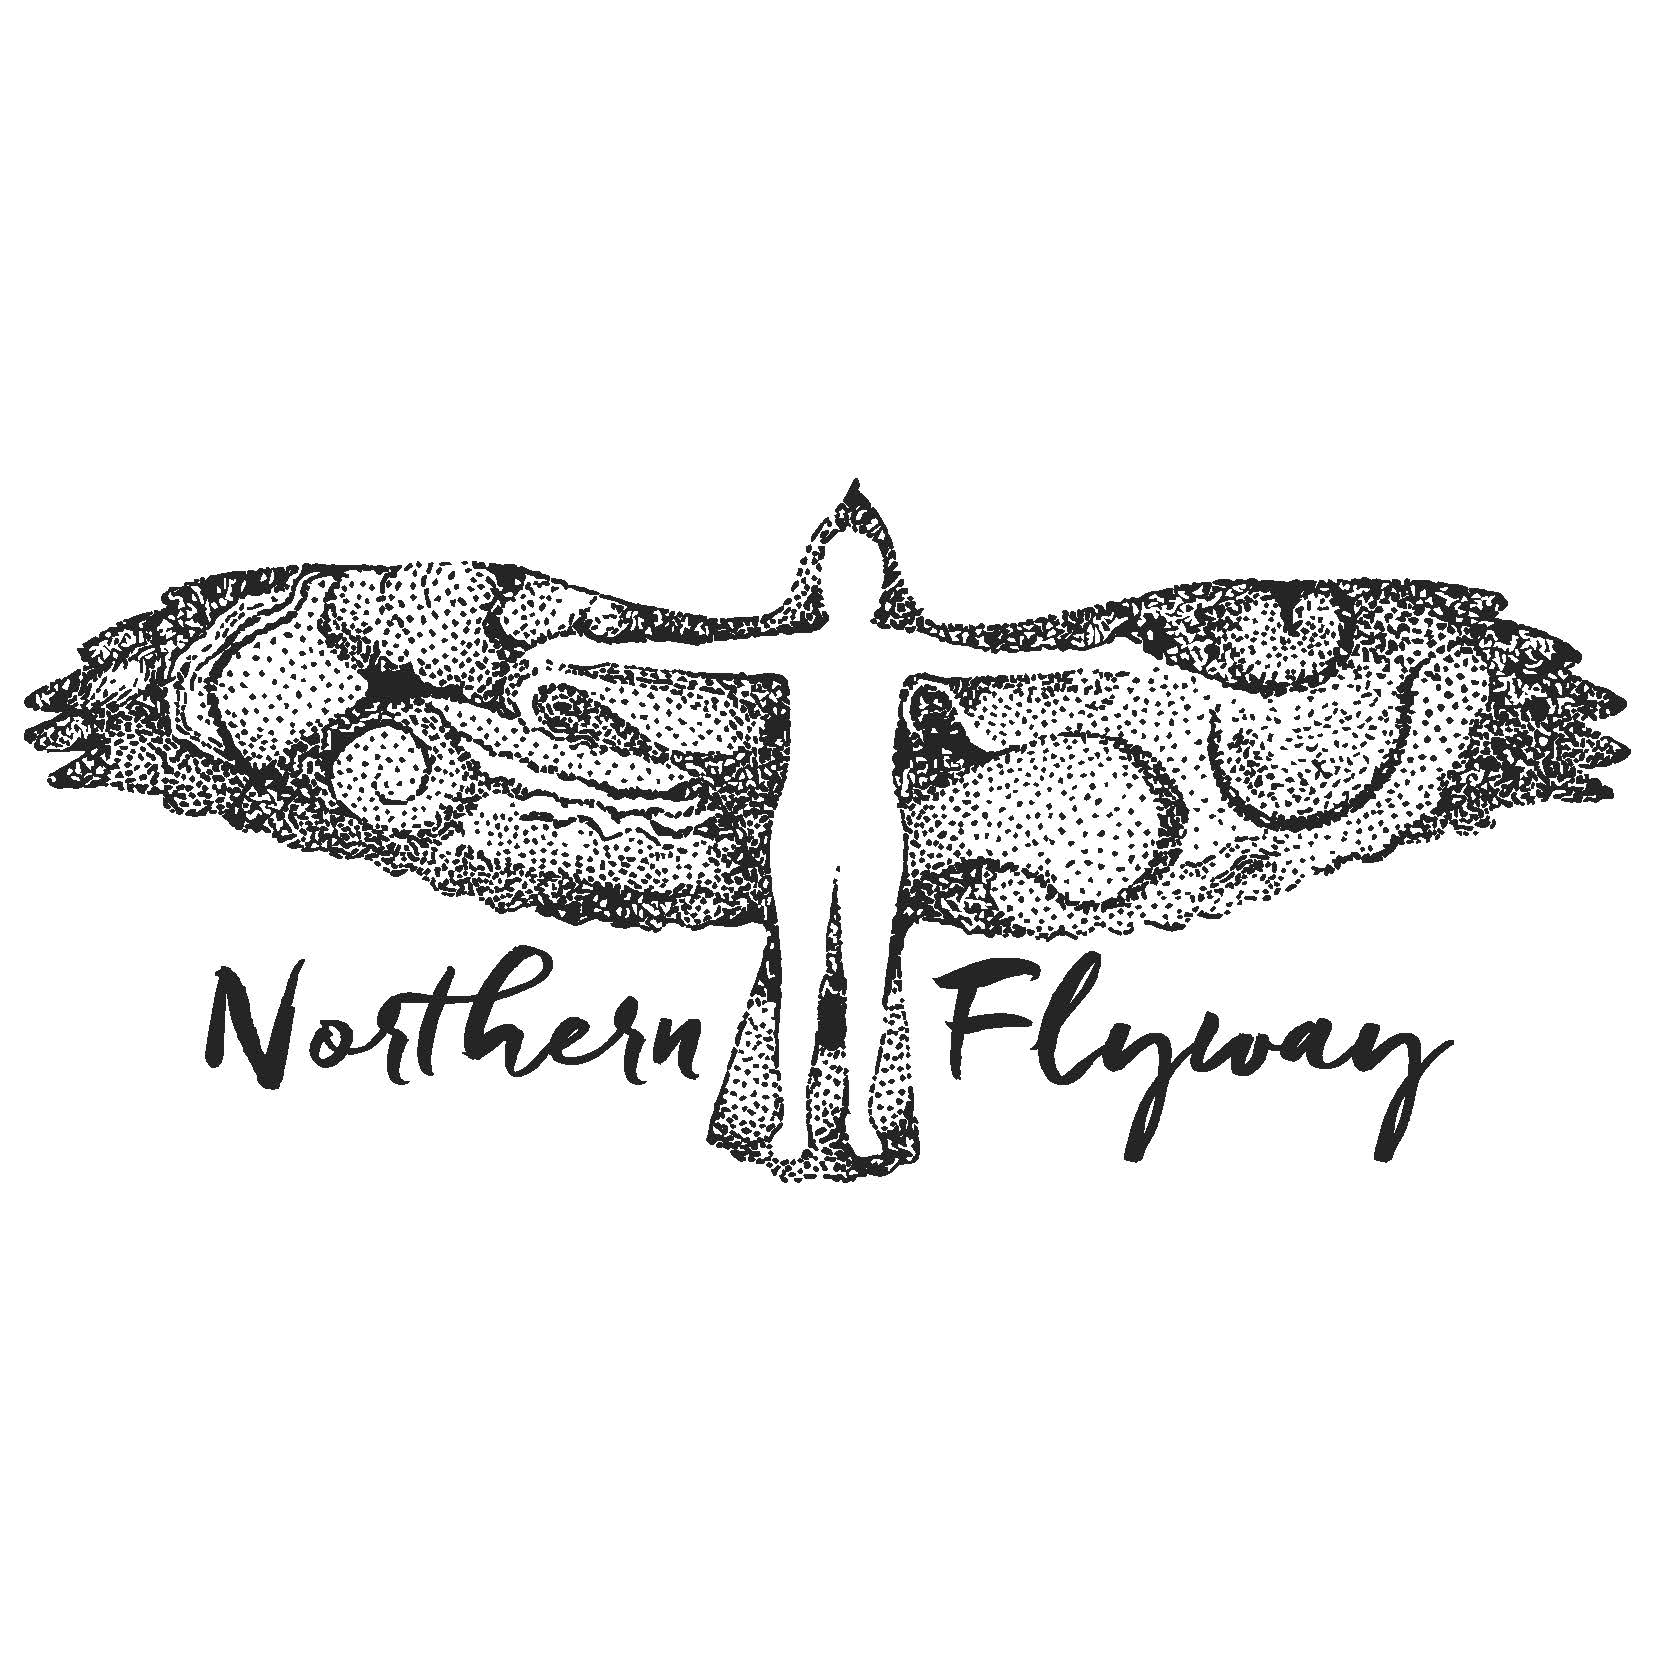 Northern Flyway: The Open Fund for Music Creators